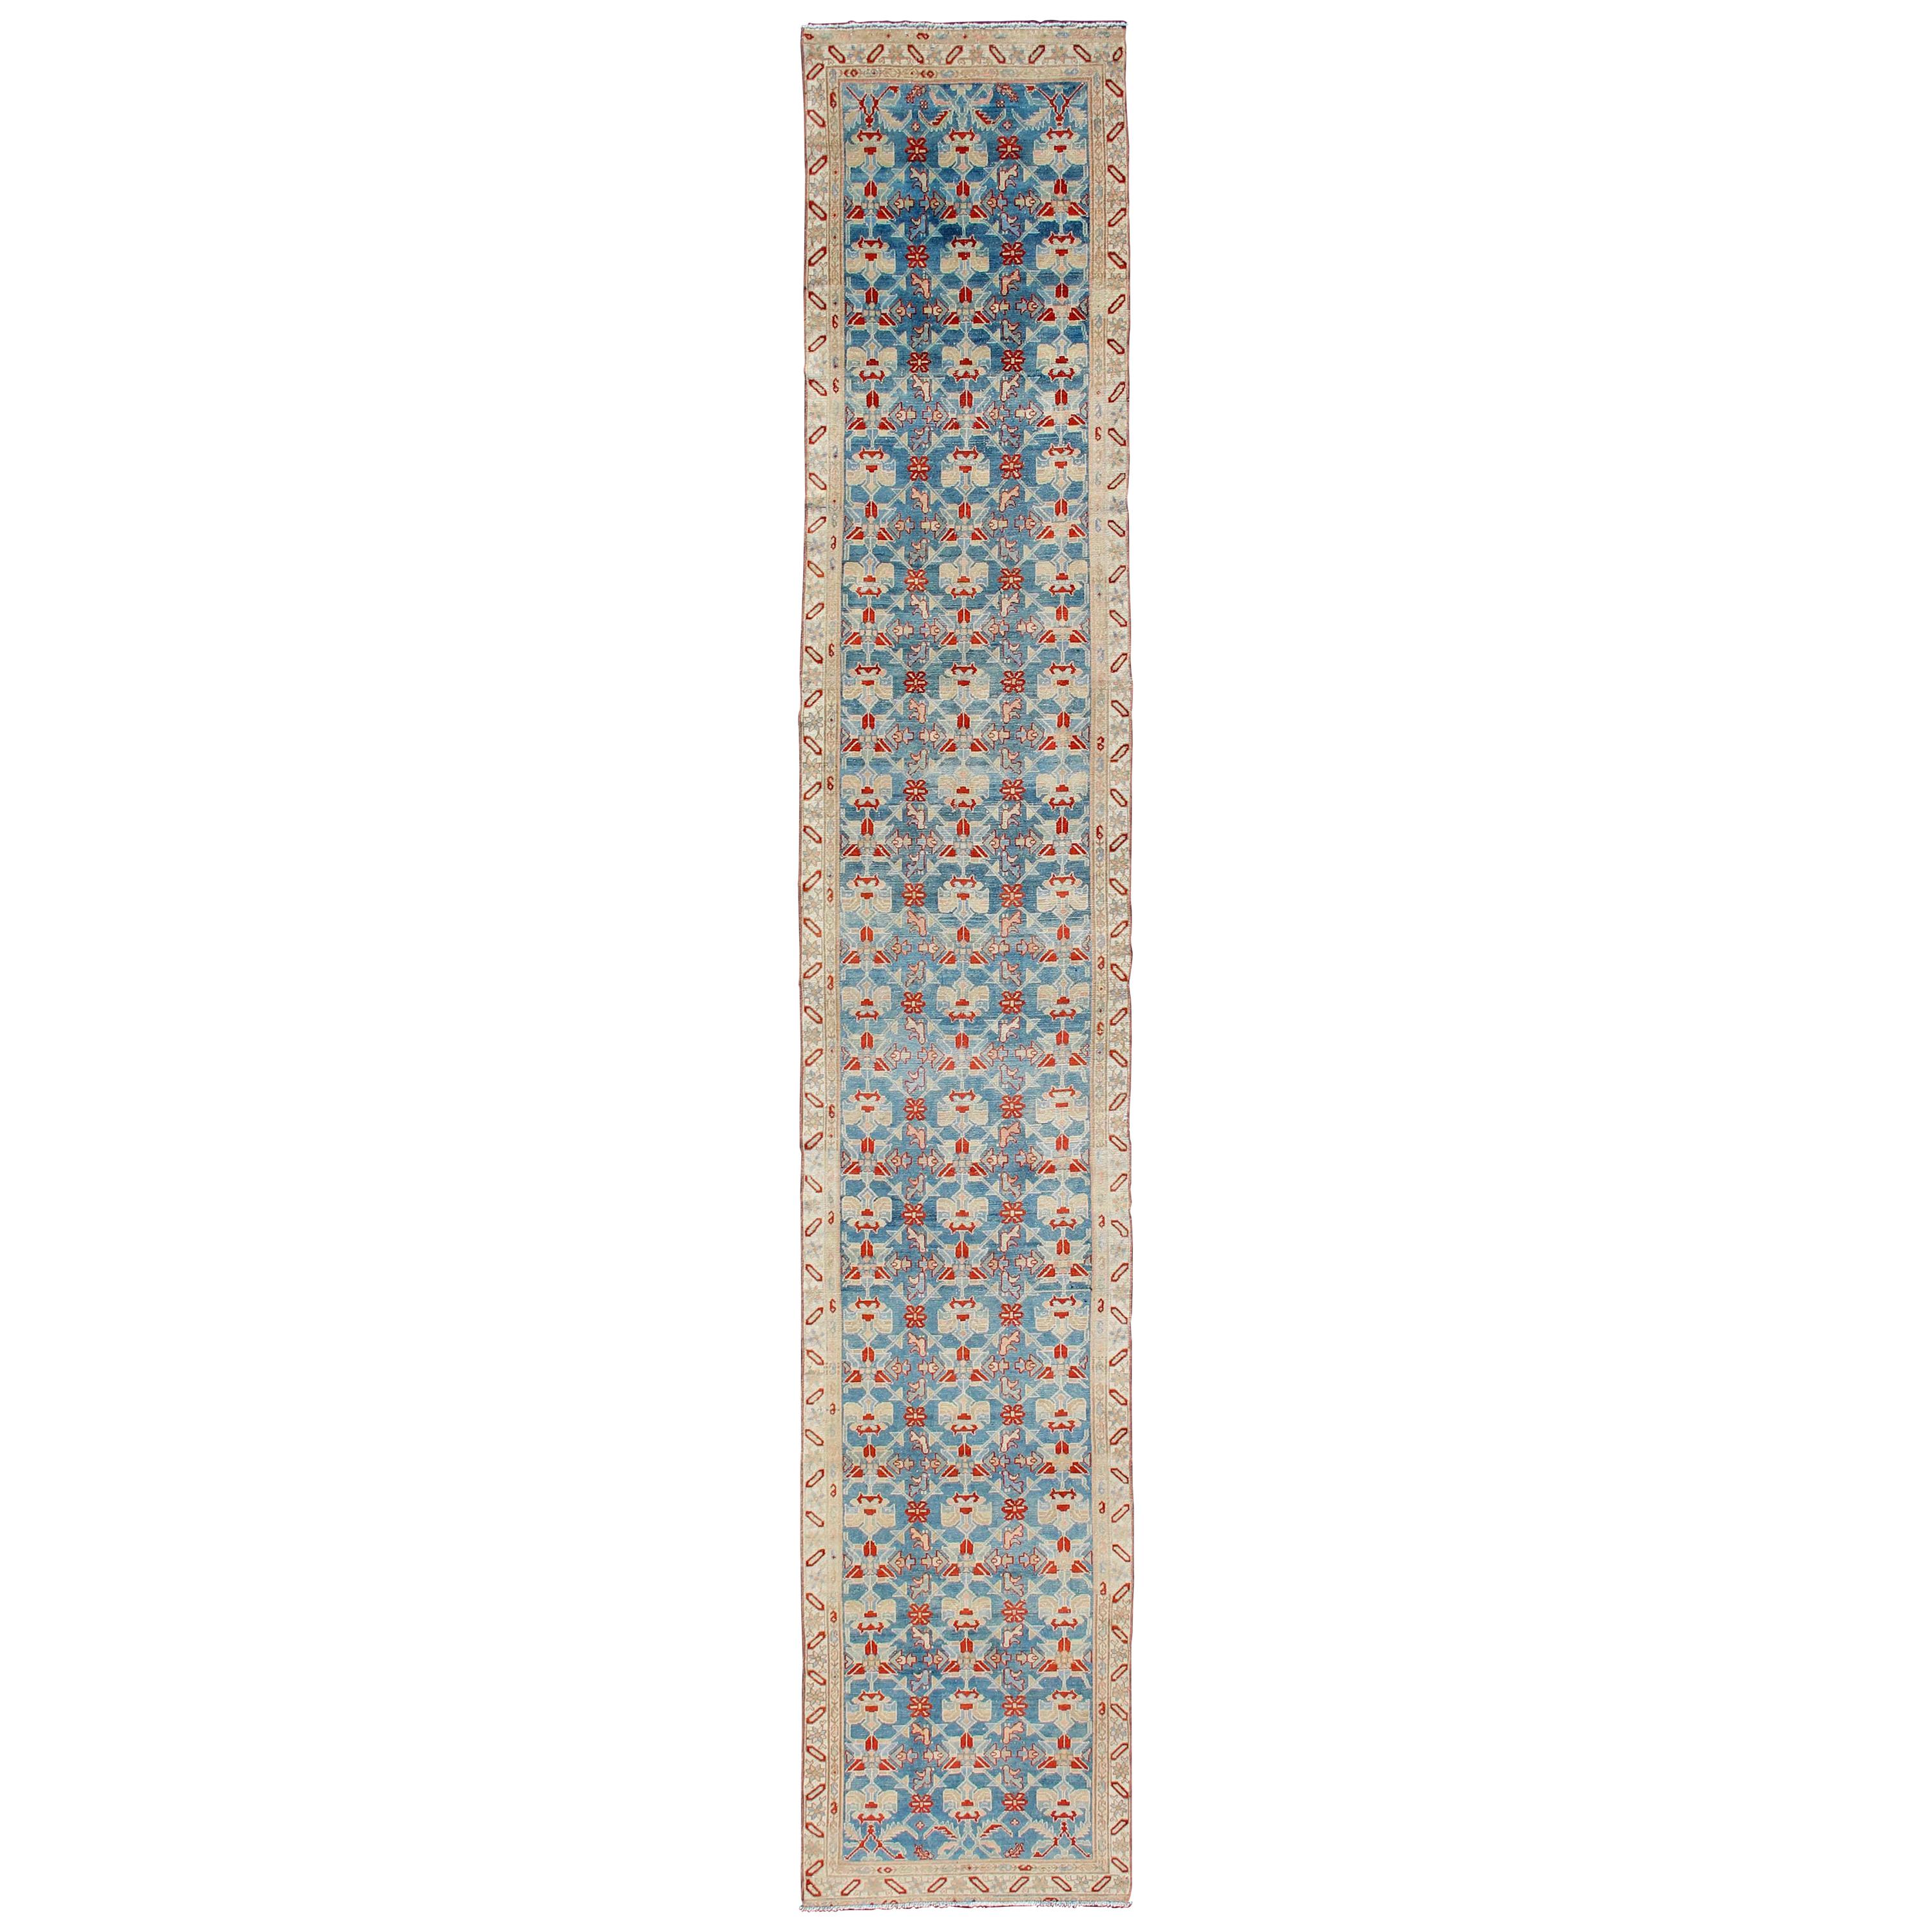 Long Antique Persian Malayer Runner with Repeating Design in Blue, Red, Nude